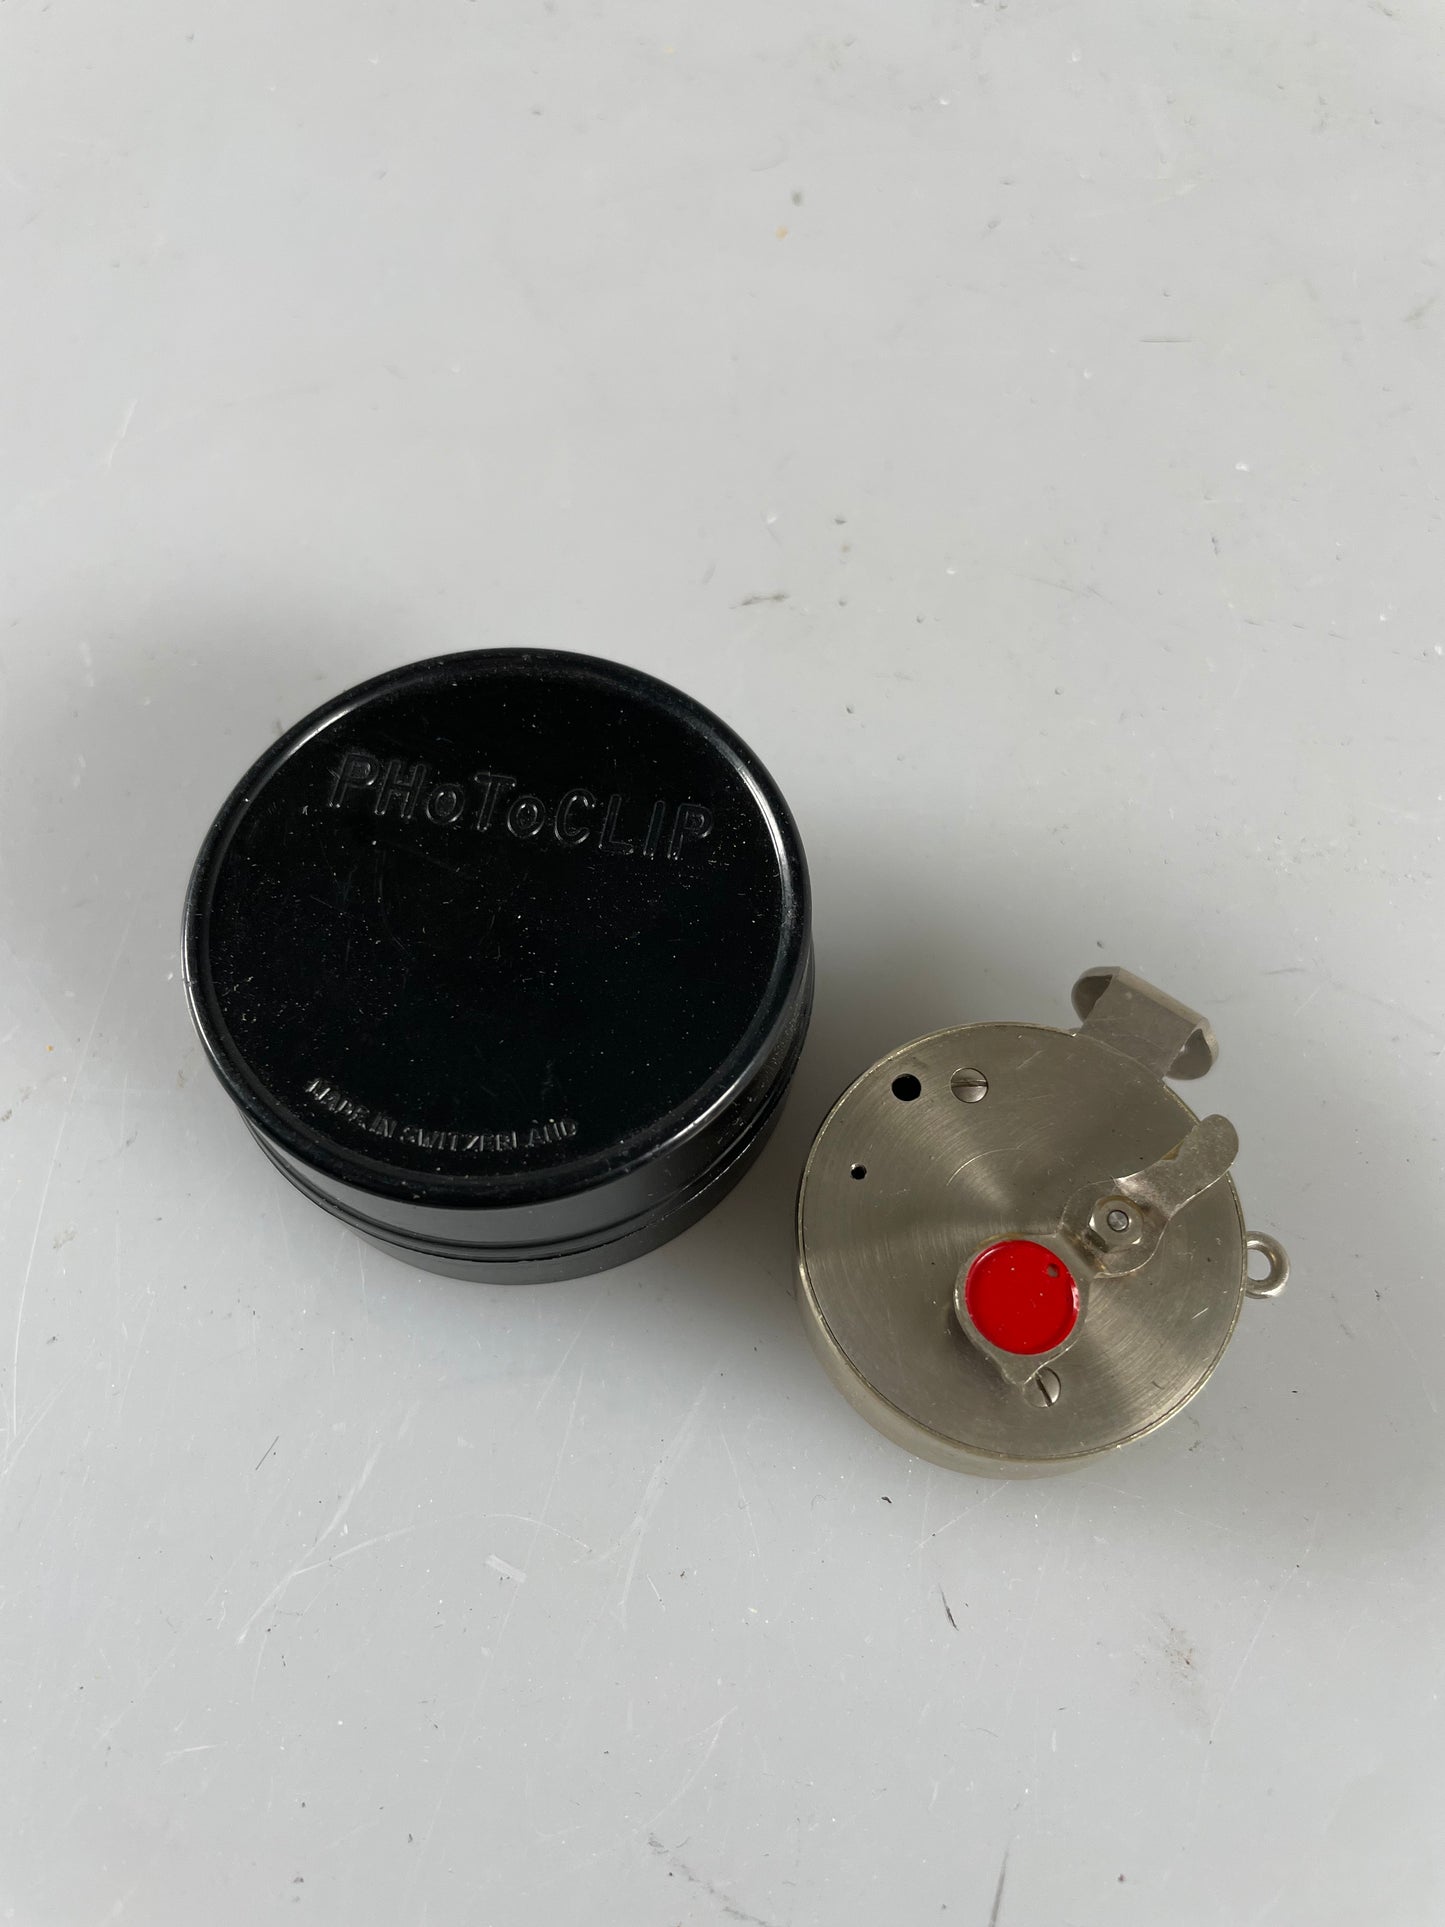 Swiss made Recta Photoclip Self-Timer for leica